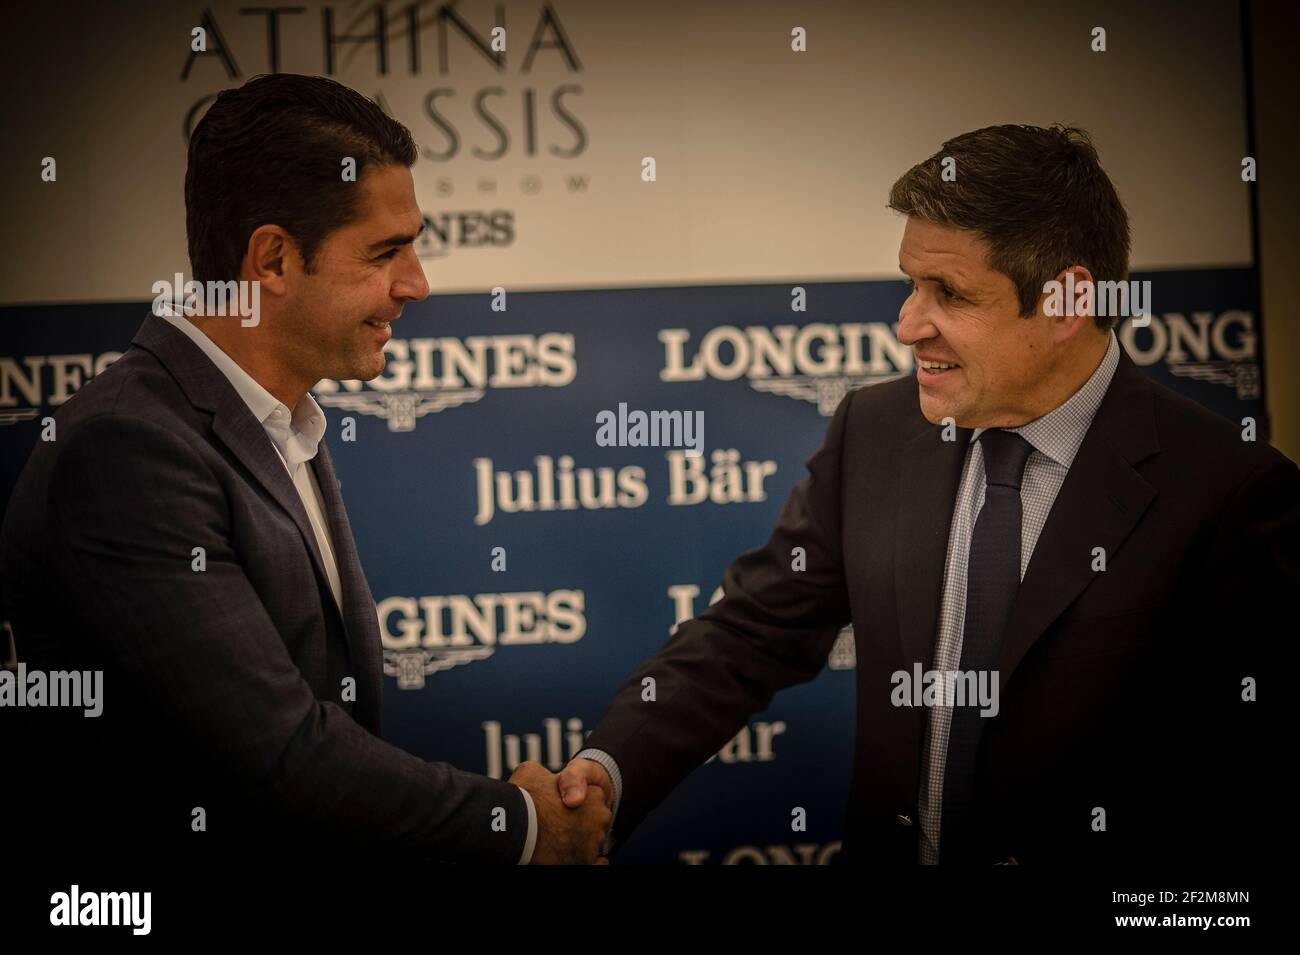 ALVARO DE MIRANDA (Rider) and Mr JUAN-CARLOS CAPELLI (LONGINES INTERNATIONAL MARKETING DIRECTOR), during the Press conference at the Bristol hotel in Paris, France, on May 21, 2014 for the Longines Athina Onassis Horse Show in June 5th-7th in Pampelonne beach, Saint Tropez, France - Photo Christophe Bricot / DPPI Stock Photo